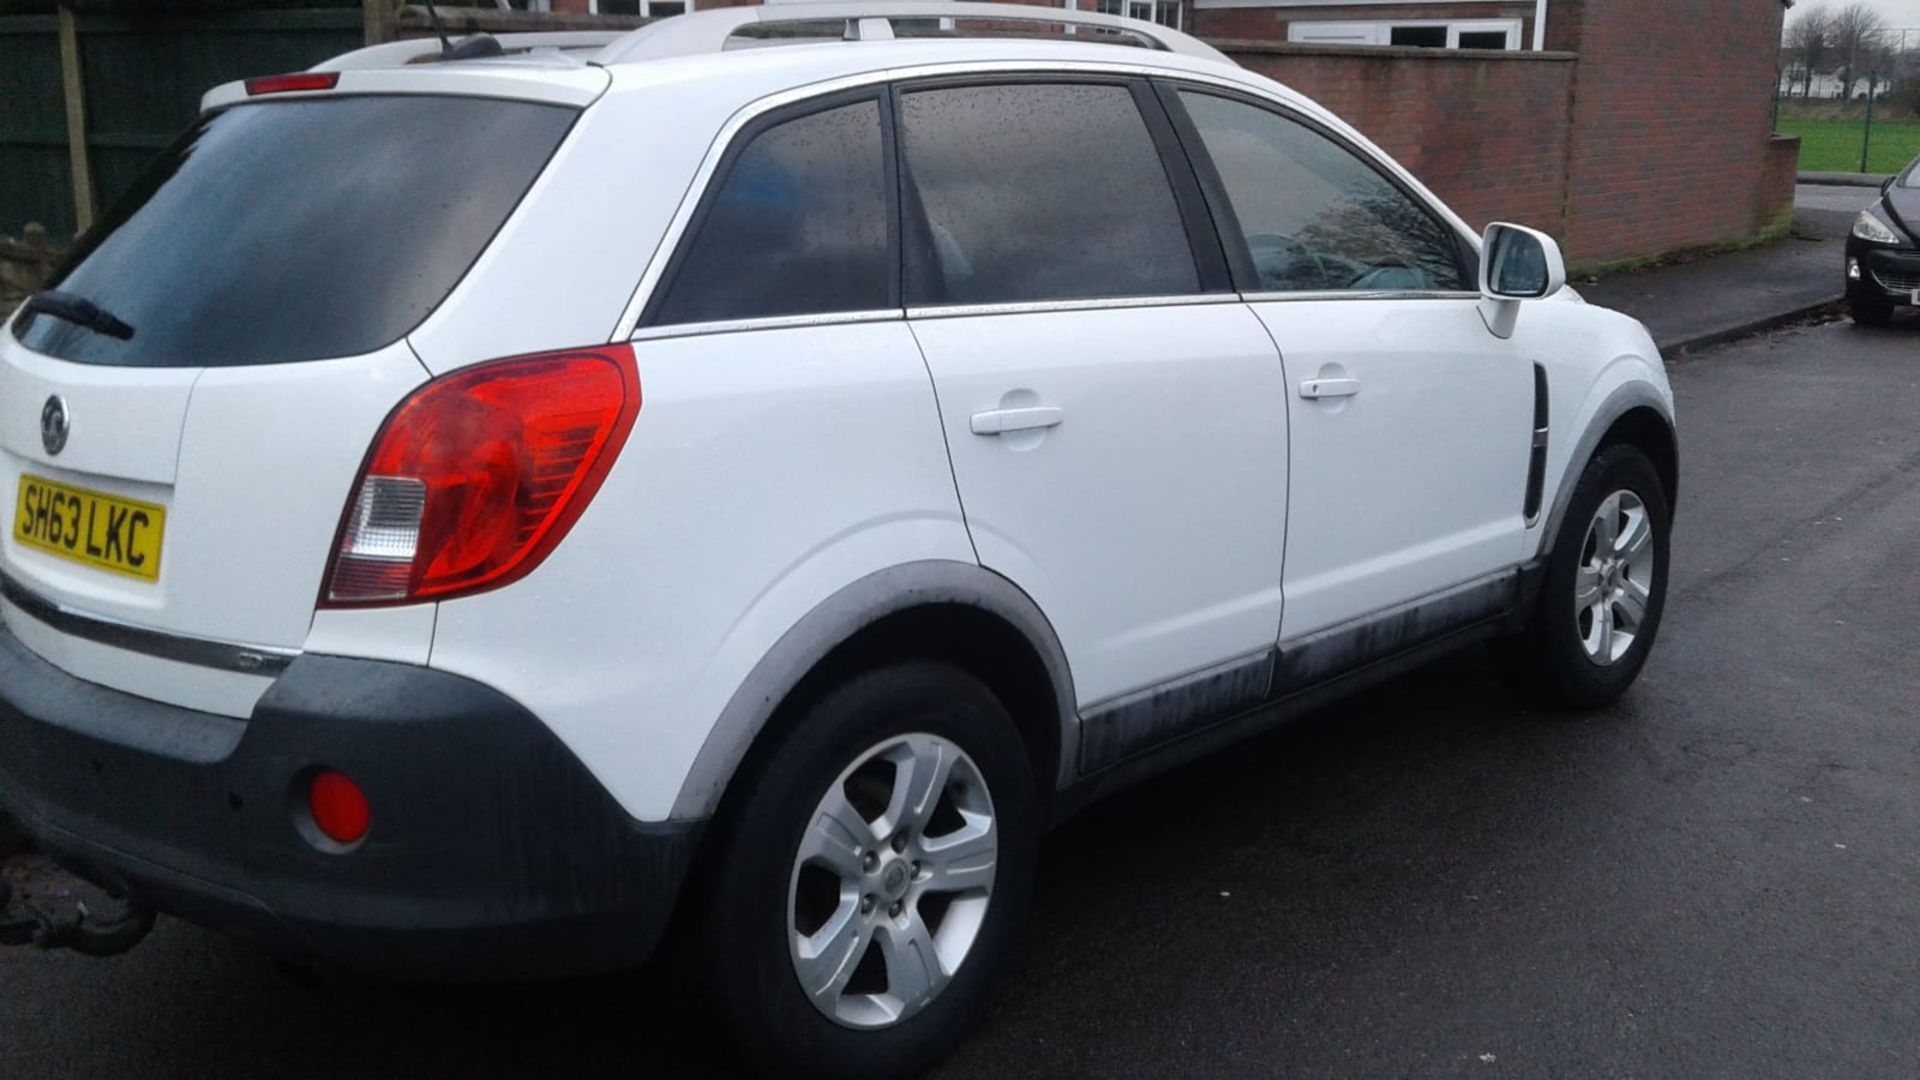 2013/63 REG VAUXHALL ANTARA EXCLUSIVE CDTI S/S 2.2 DIESEL 5DR, SHOWING 2 FORMER KEEPERS *NO VAT* - Image 5 of 11